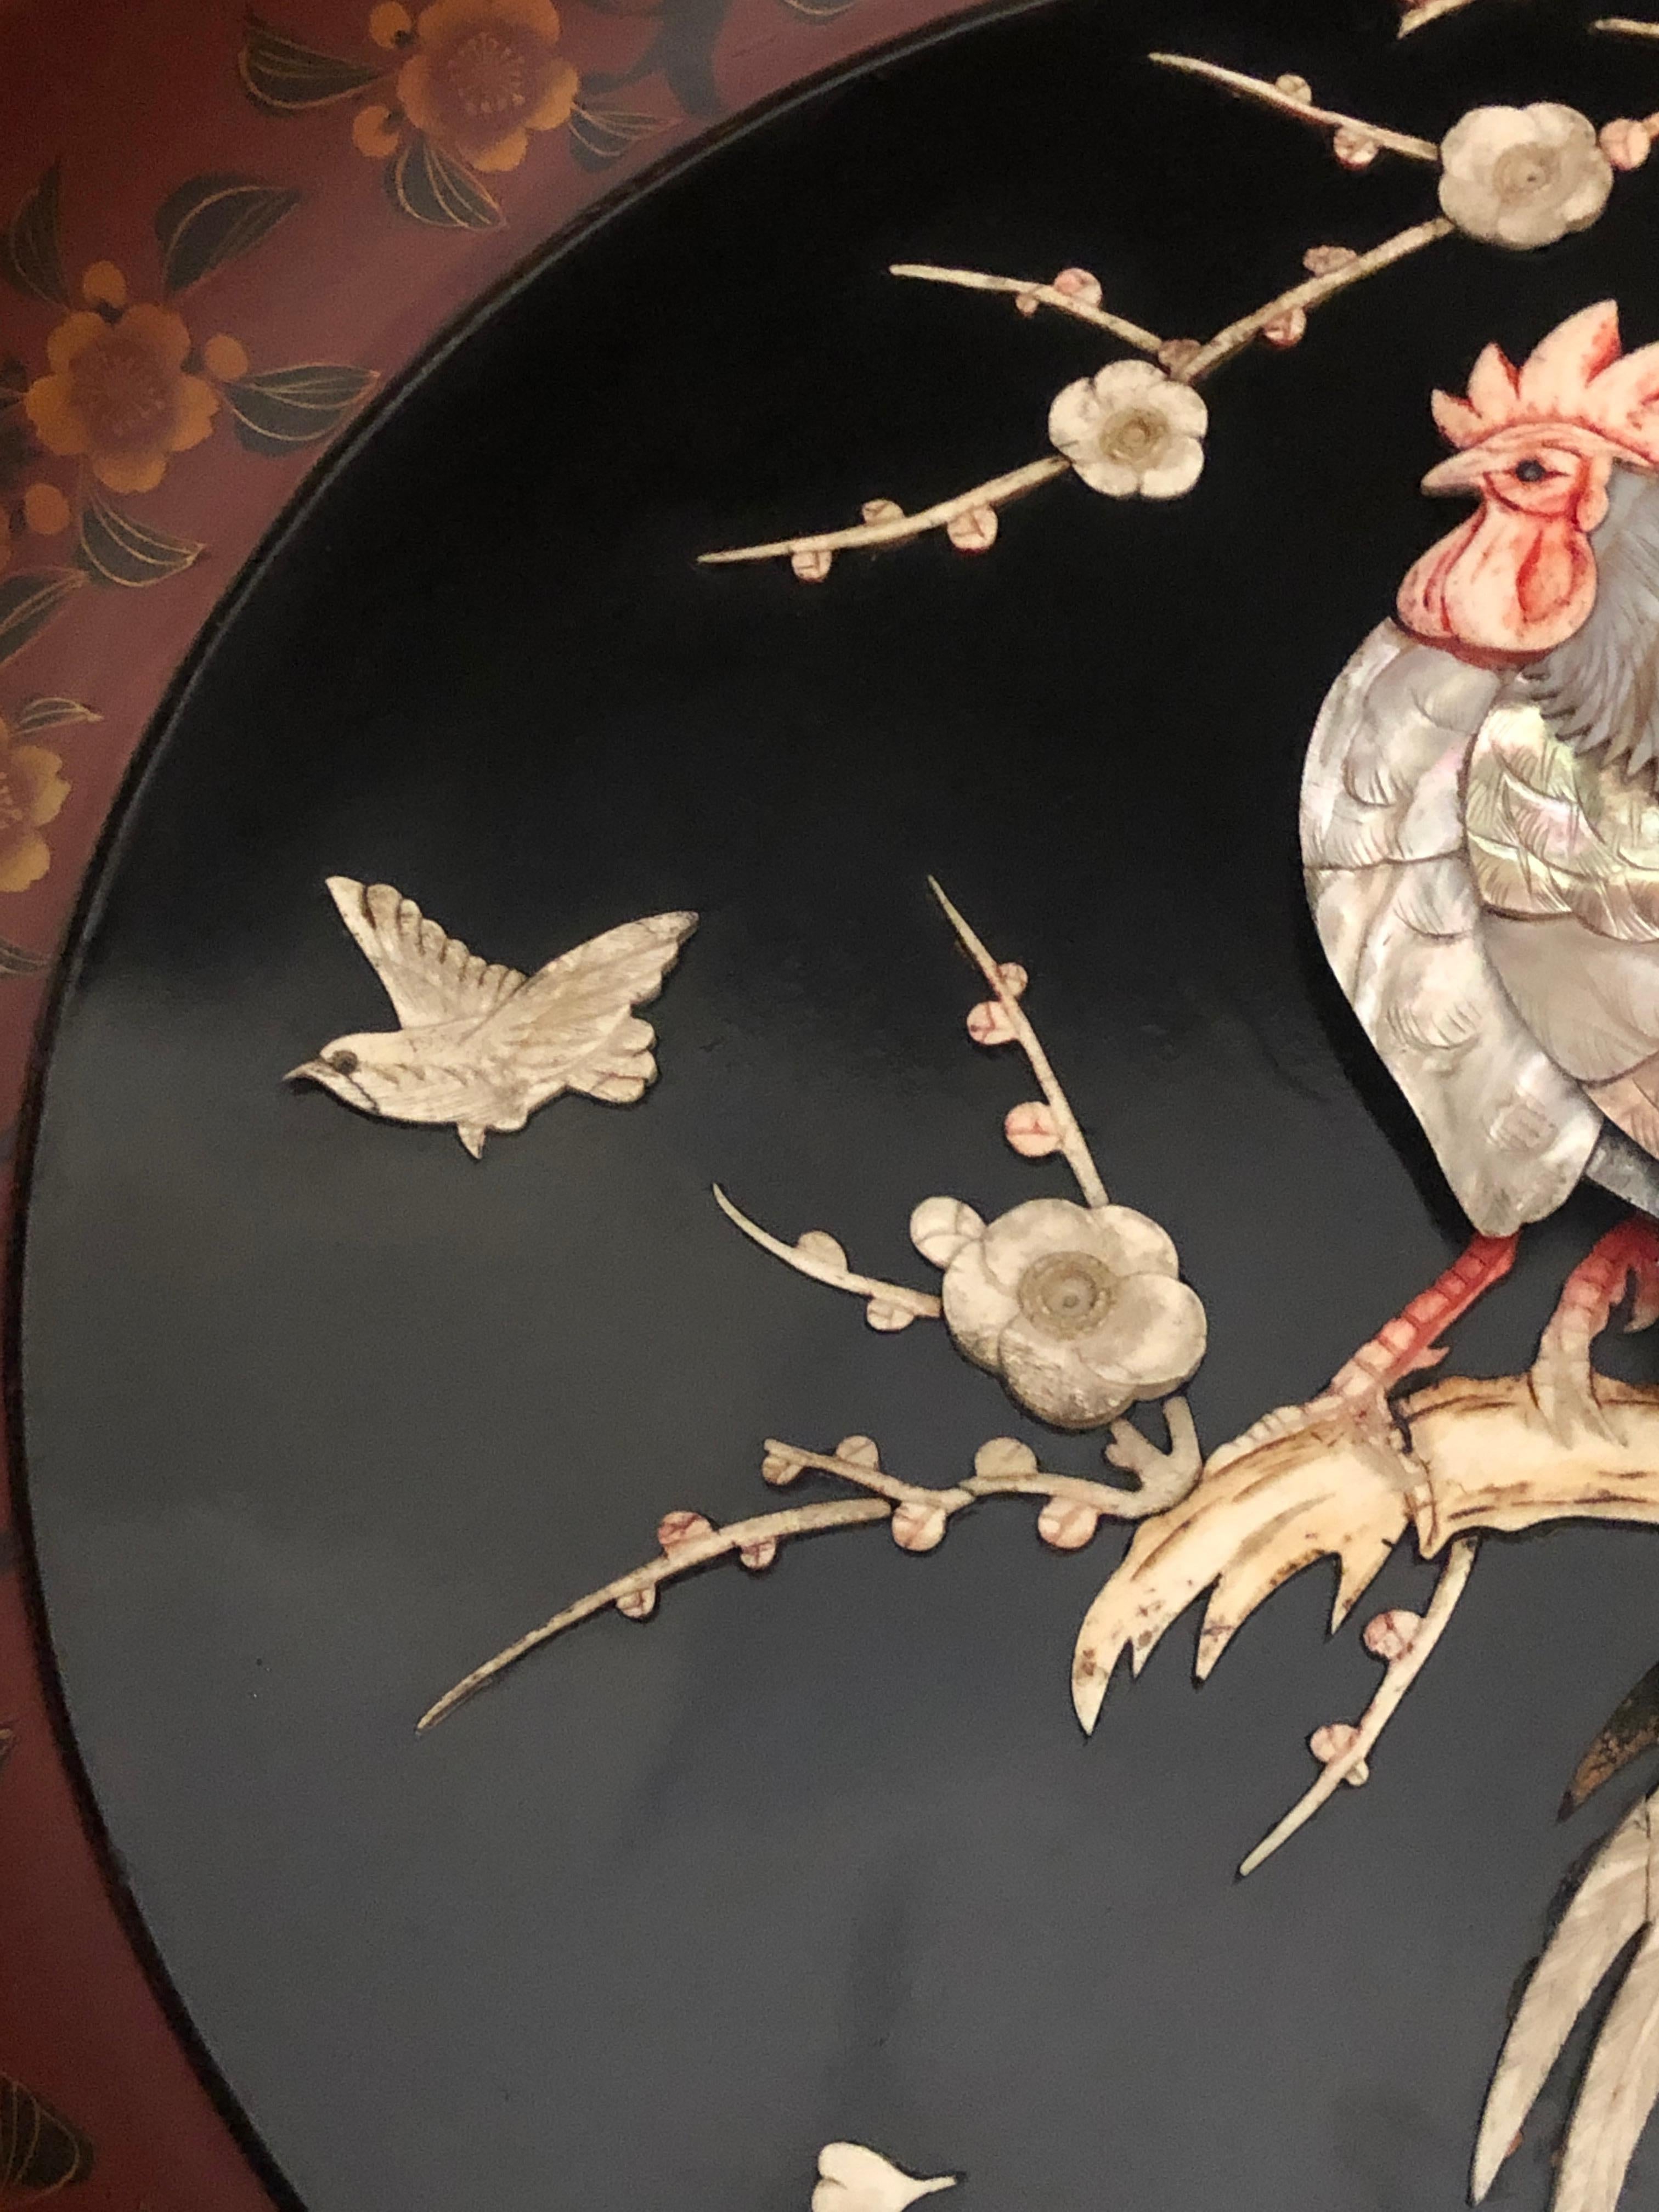 19th century Meiji period charger with cockerel beautifully realised in layers of carved shell, mother of pearl and bone to stand in high relief against the black lacquered ground. Presented in the original red lacquered round frame also painted